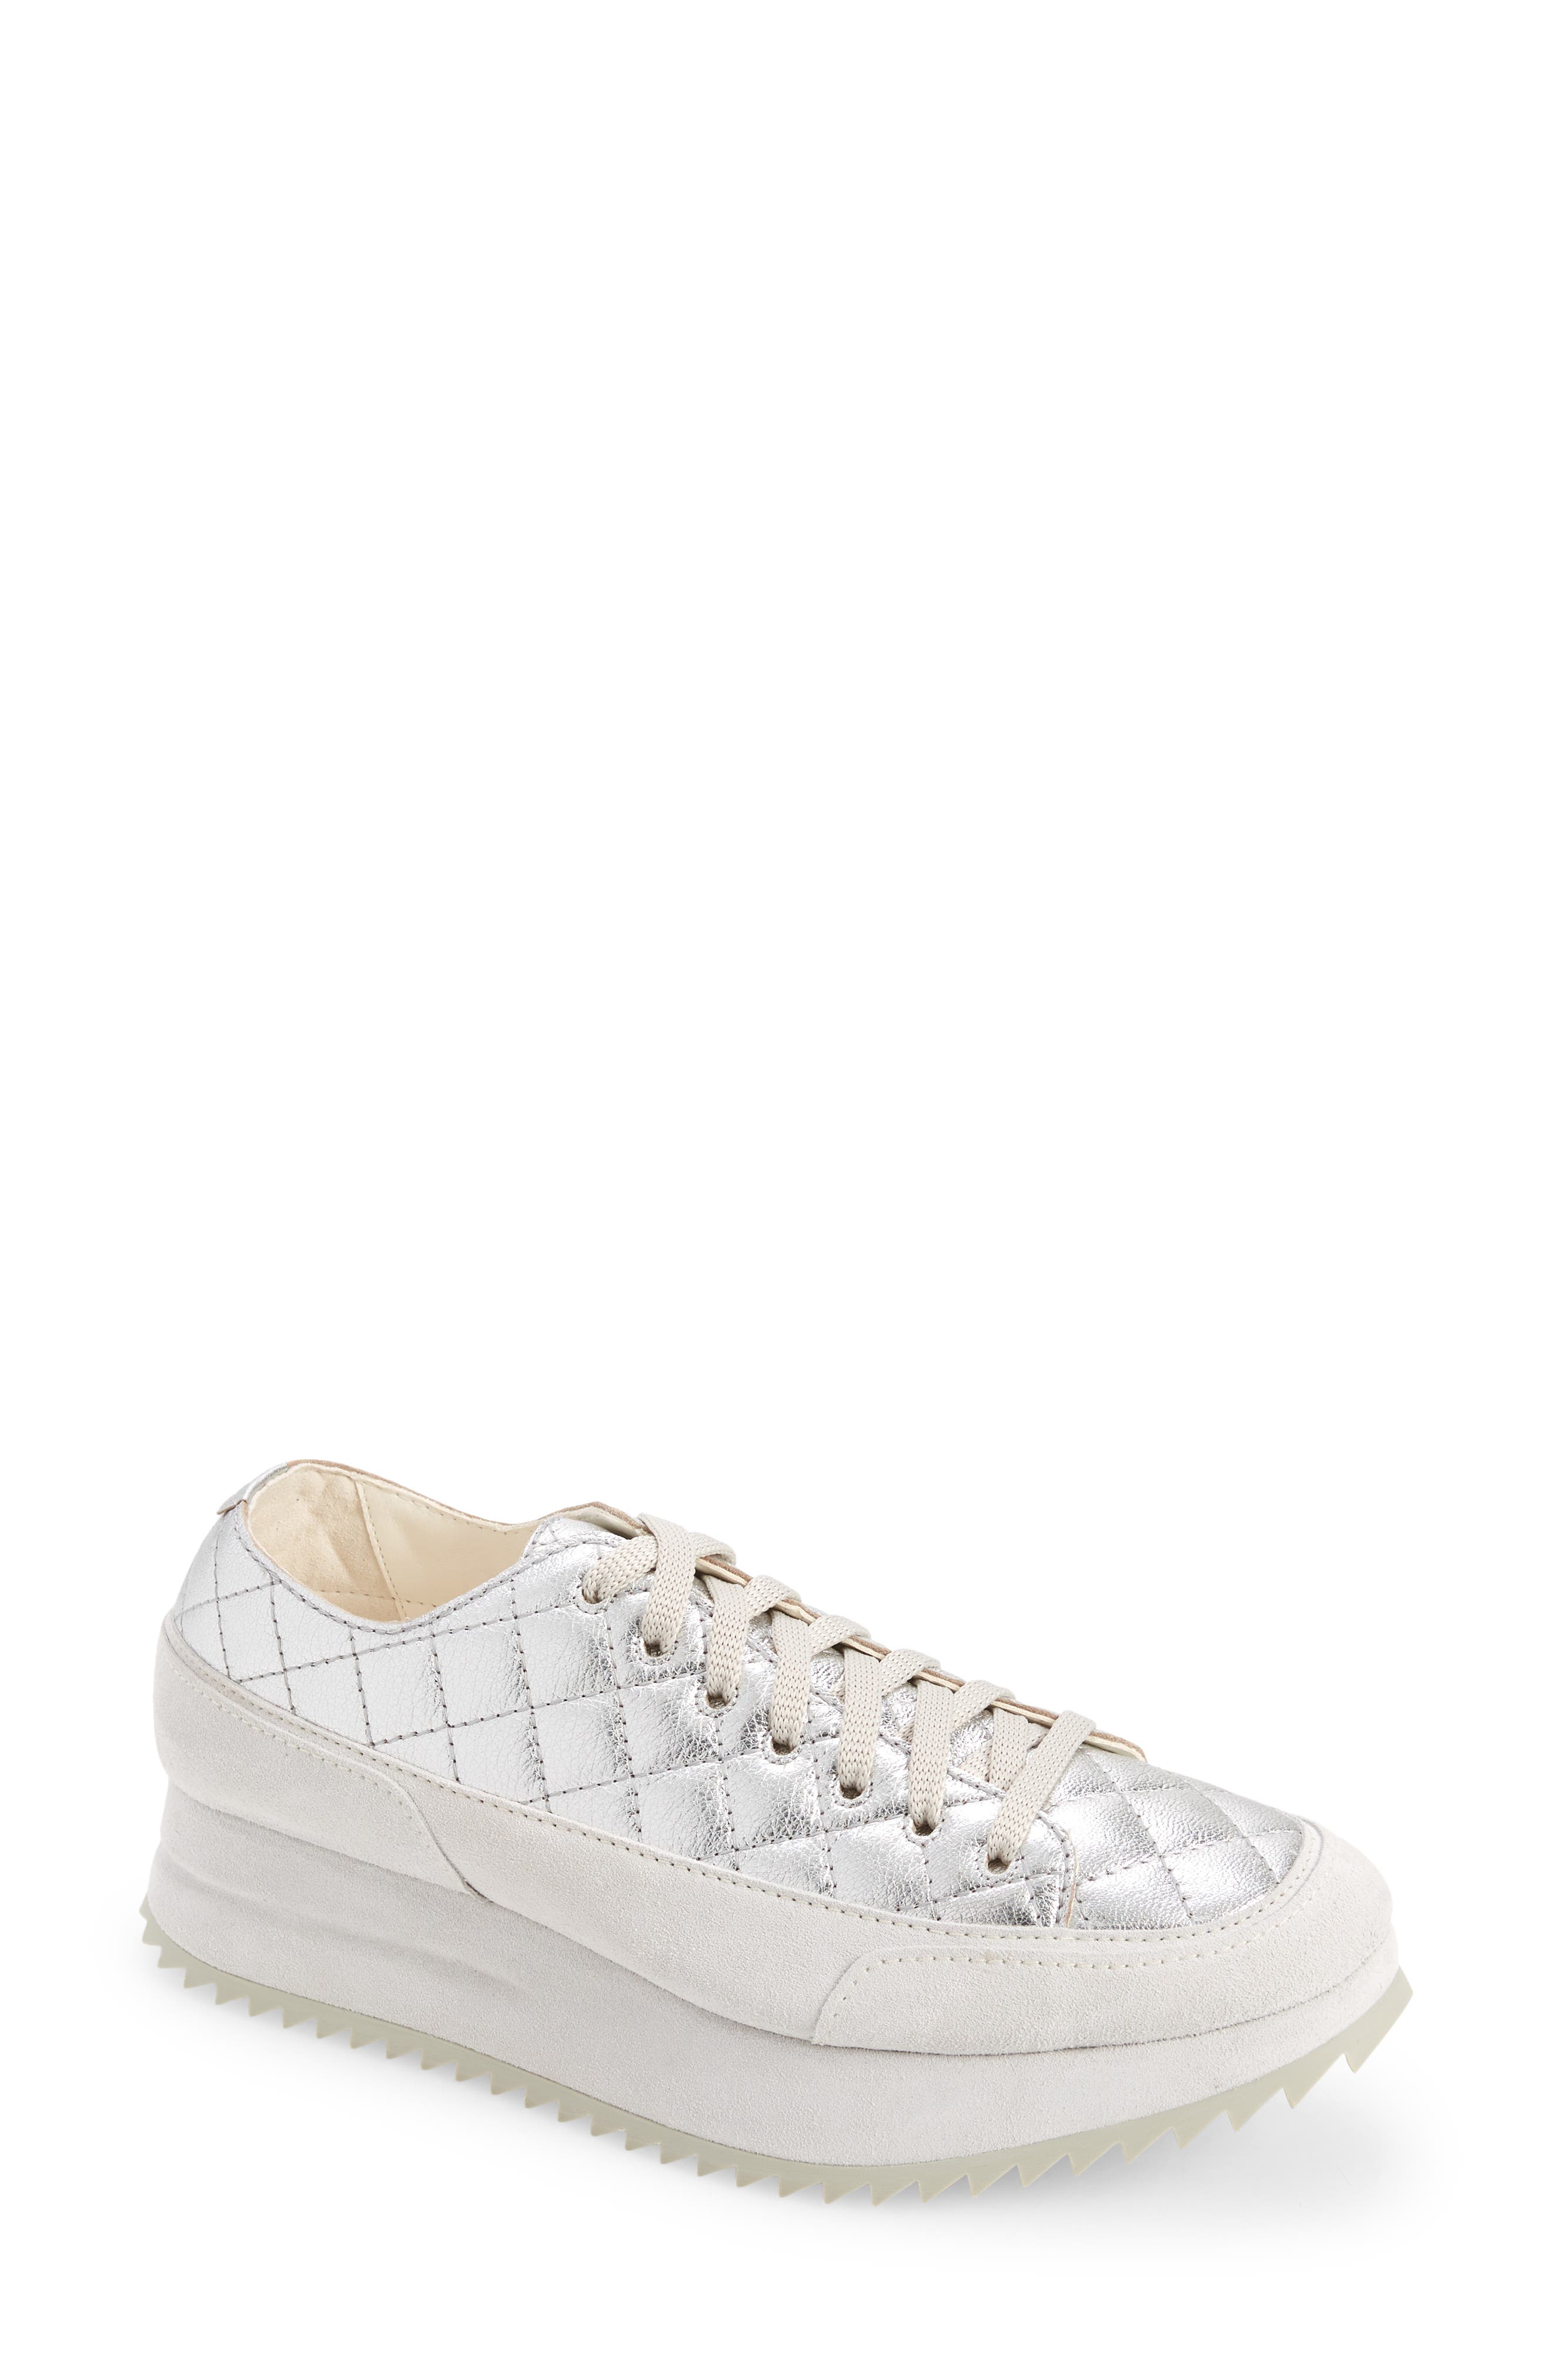 Osaka Quilted Leather Flatform Sneakers